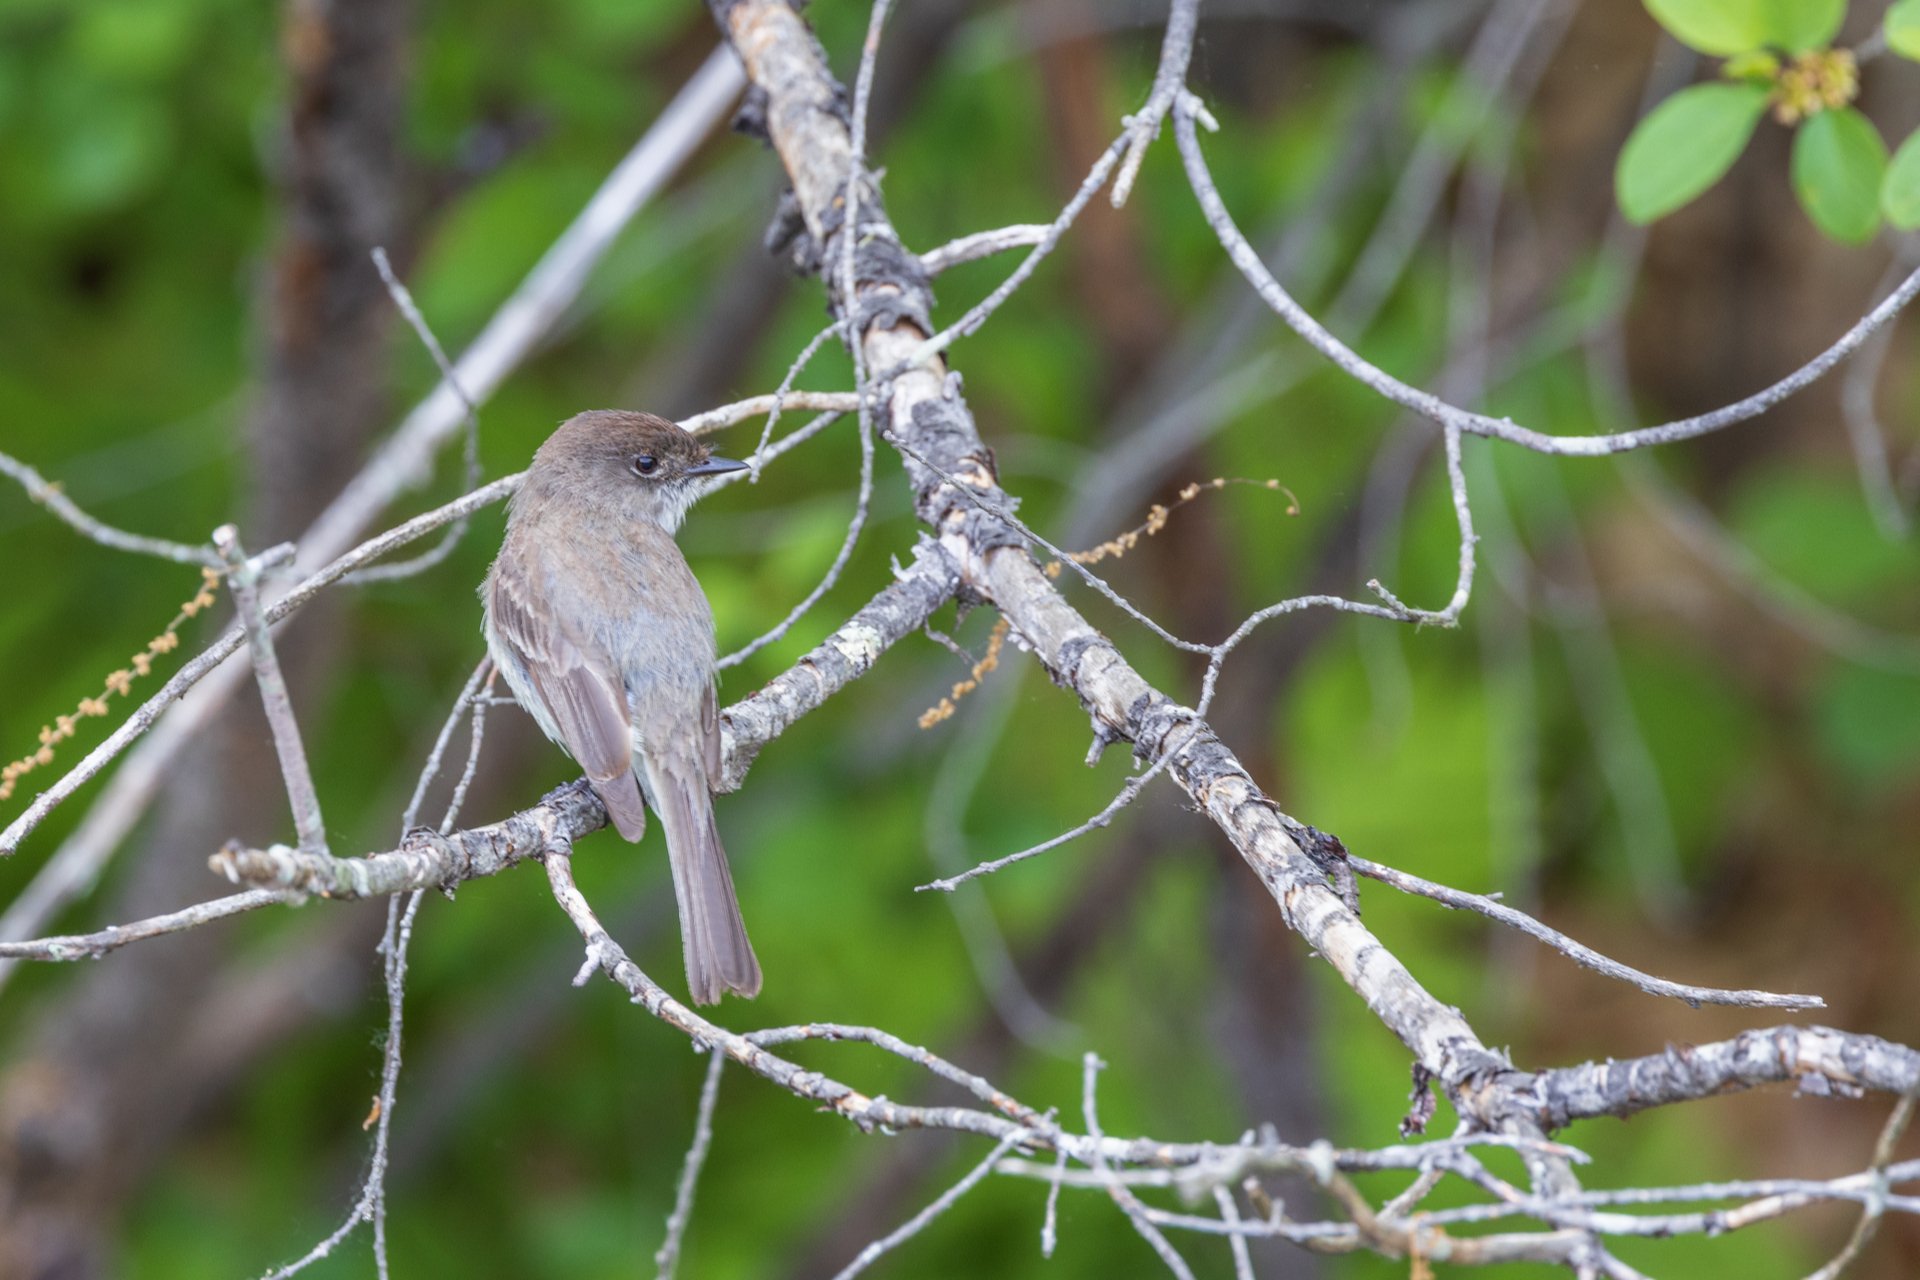 Eastern Phoebe perched on branches